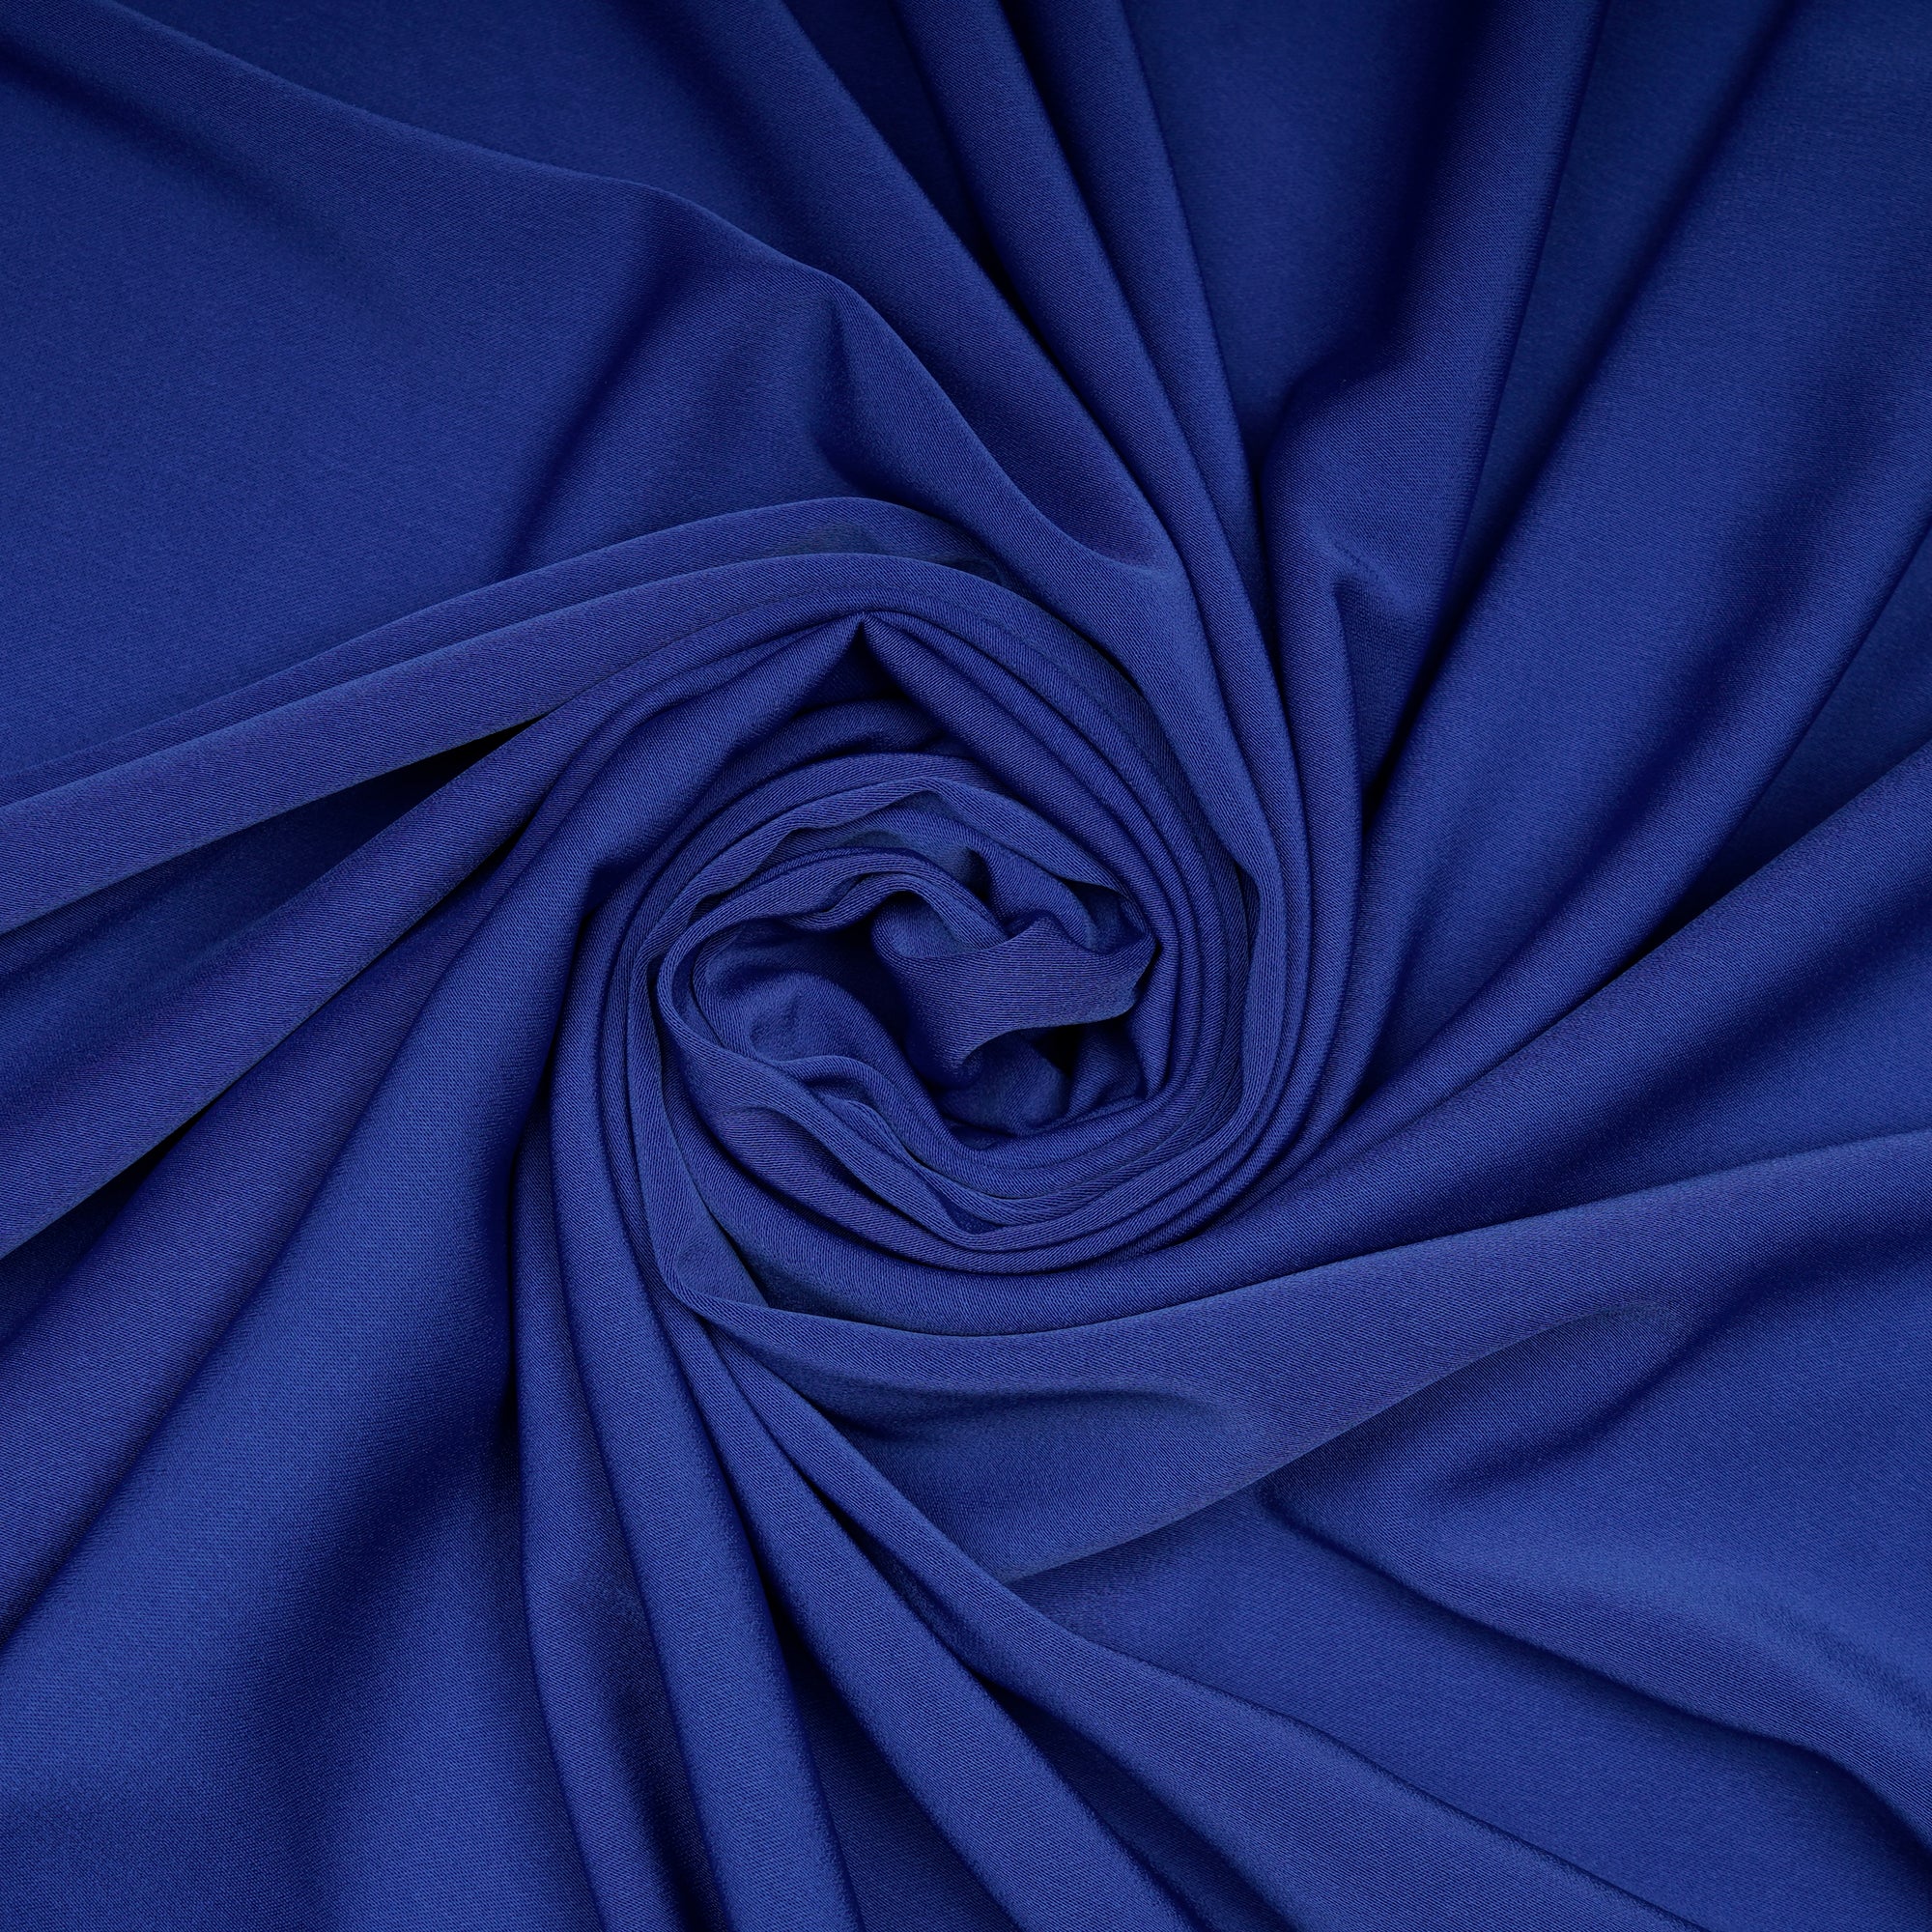 Navy Blue Solid Dyed Imported Prada Crepe Fabric (60" Width)